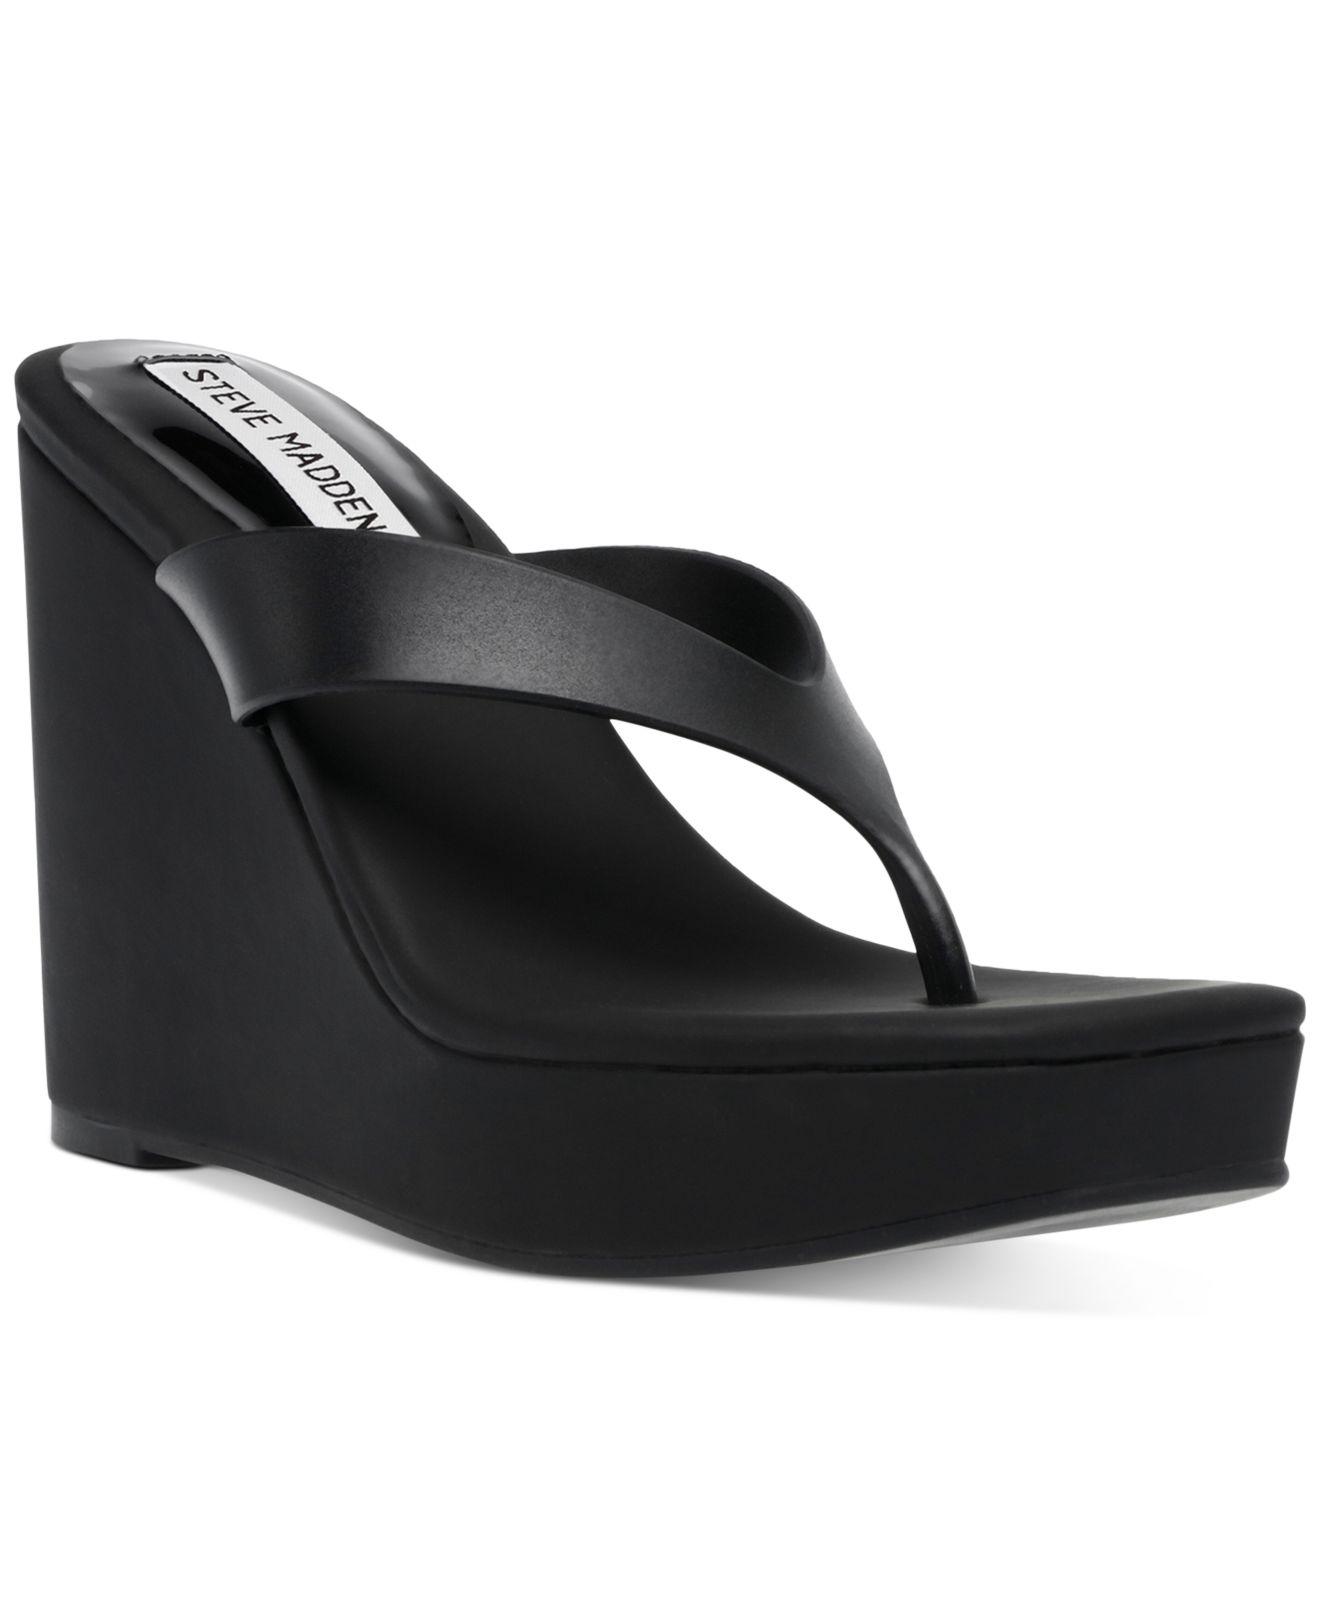 Steve Madden Refined Jelly Thong Wedge Sandals in Black | Lyst